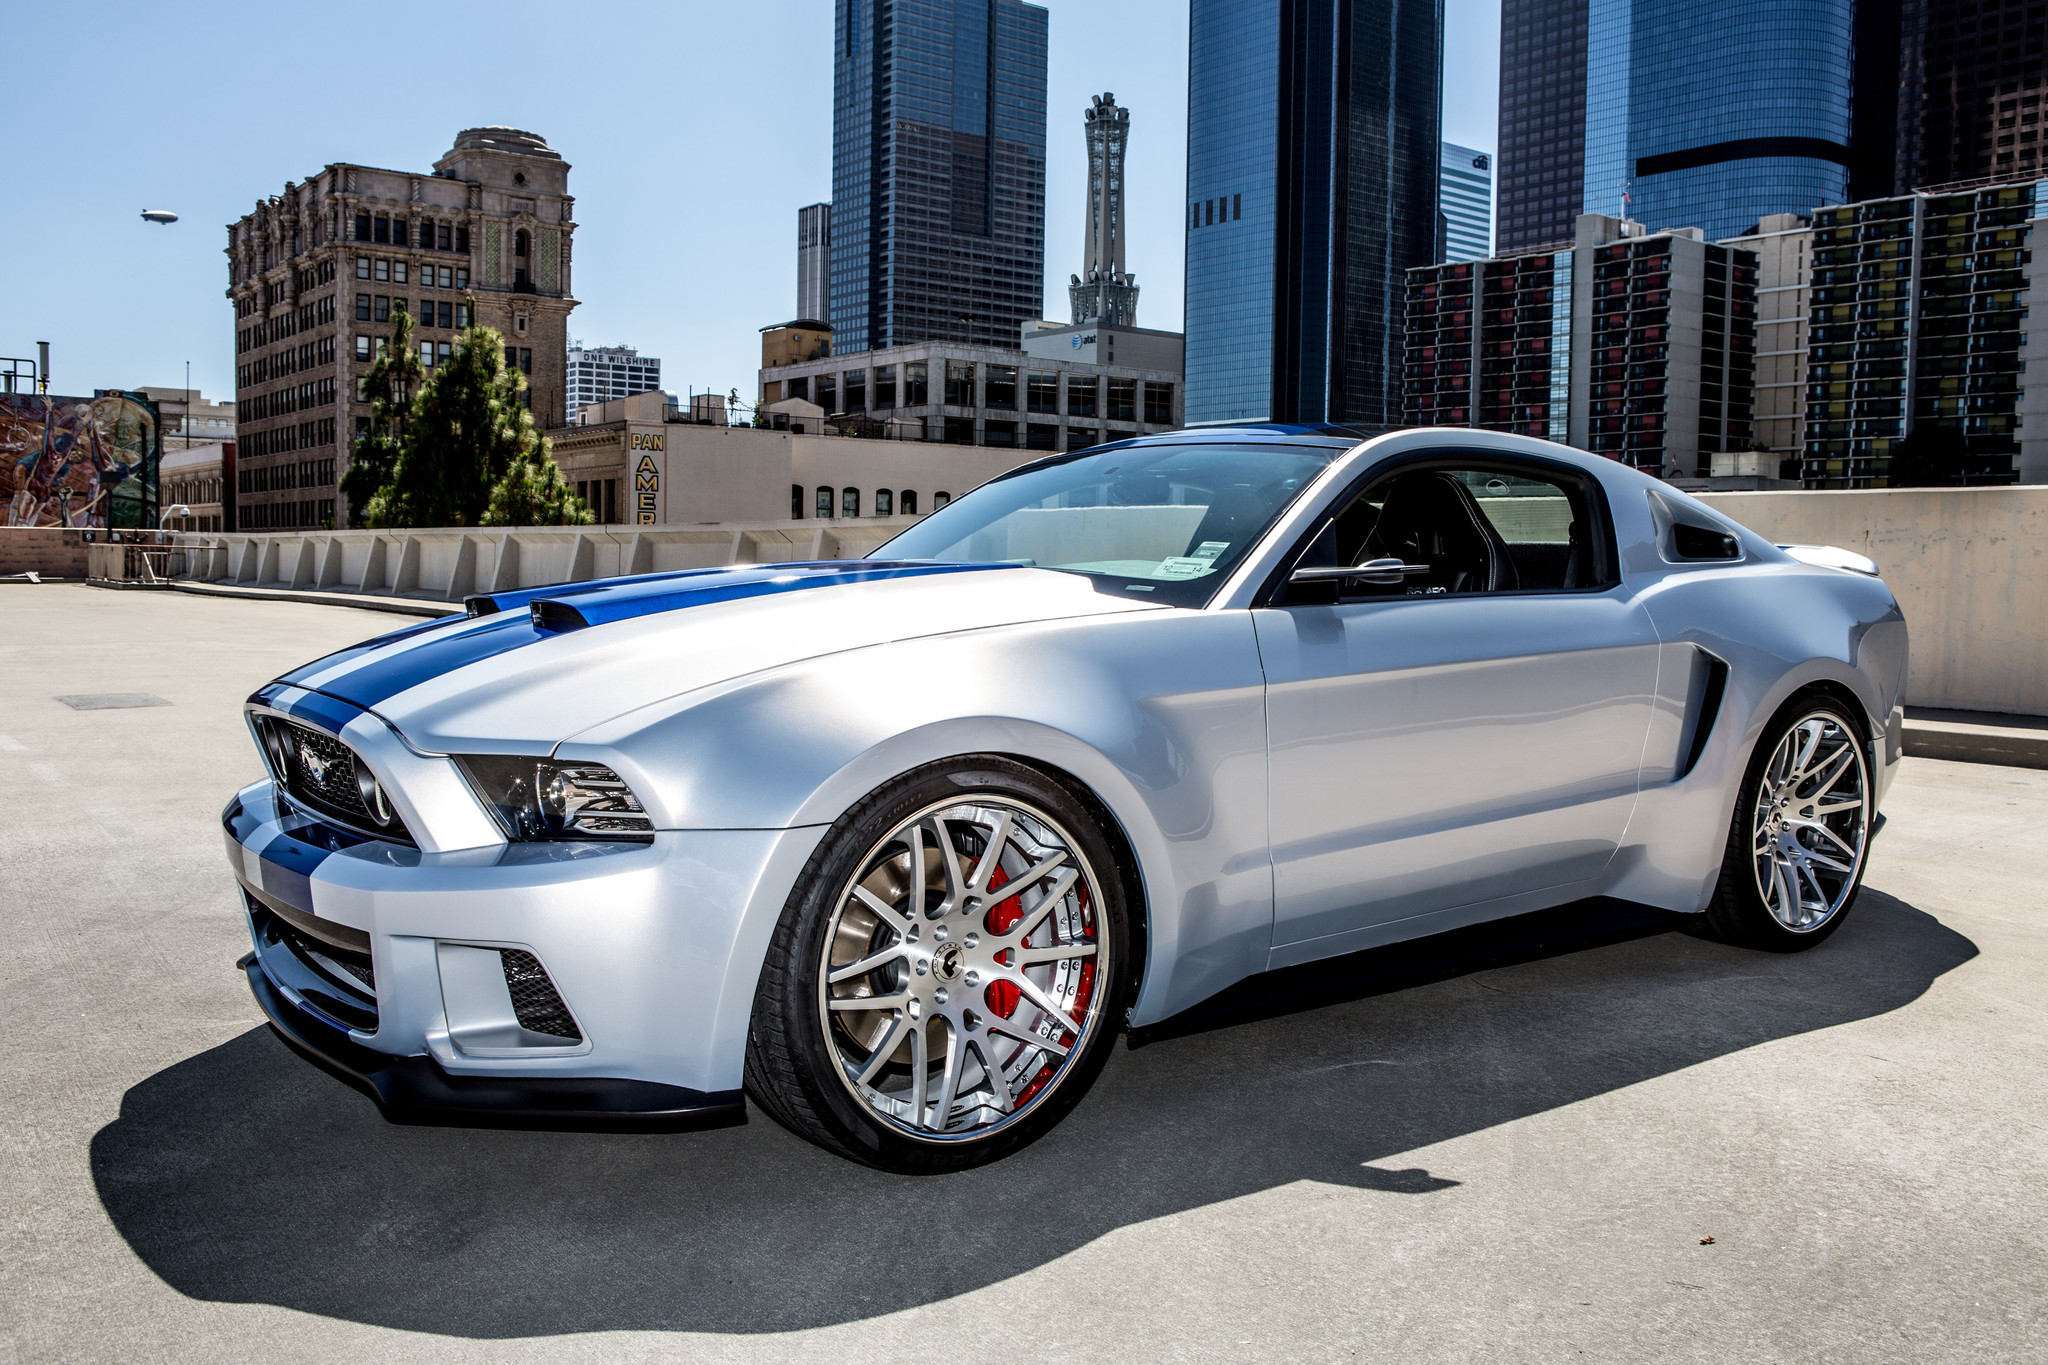 General 2048x1365 Ford Mustang silver silver cars car vehicle Ford cityscape Ford Mustang S-197 II